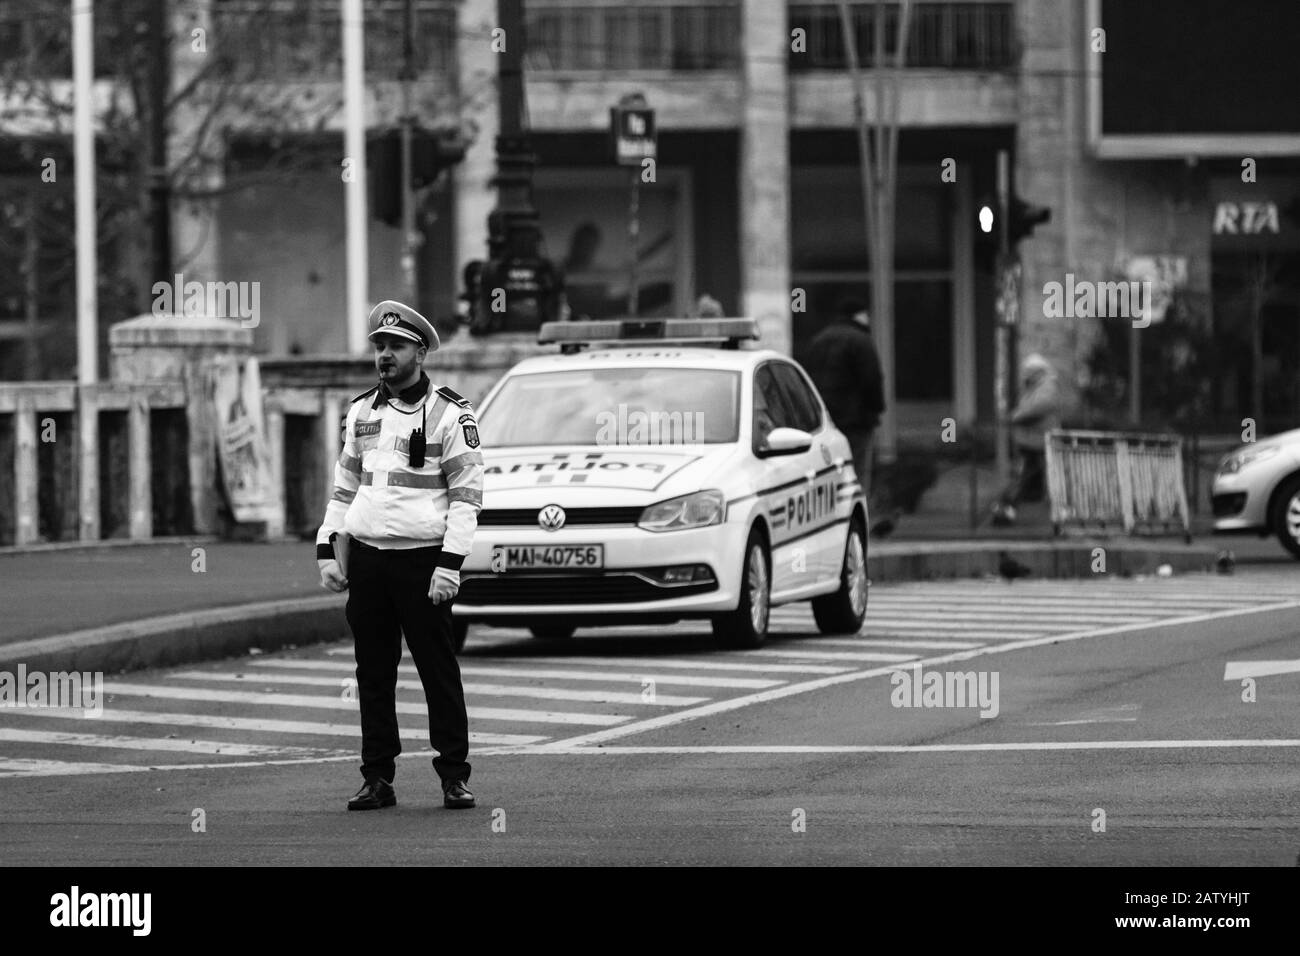 Police agent, Romanian Traffic Police (Politia Rutiera) directing traffic during the morning rush hour in downtown Bucharest, Romania, 2020 Stock Photo